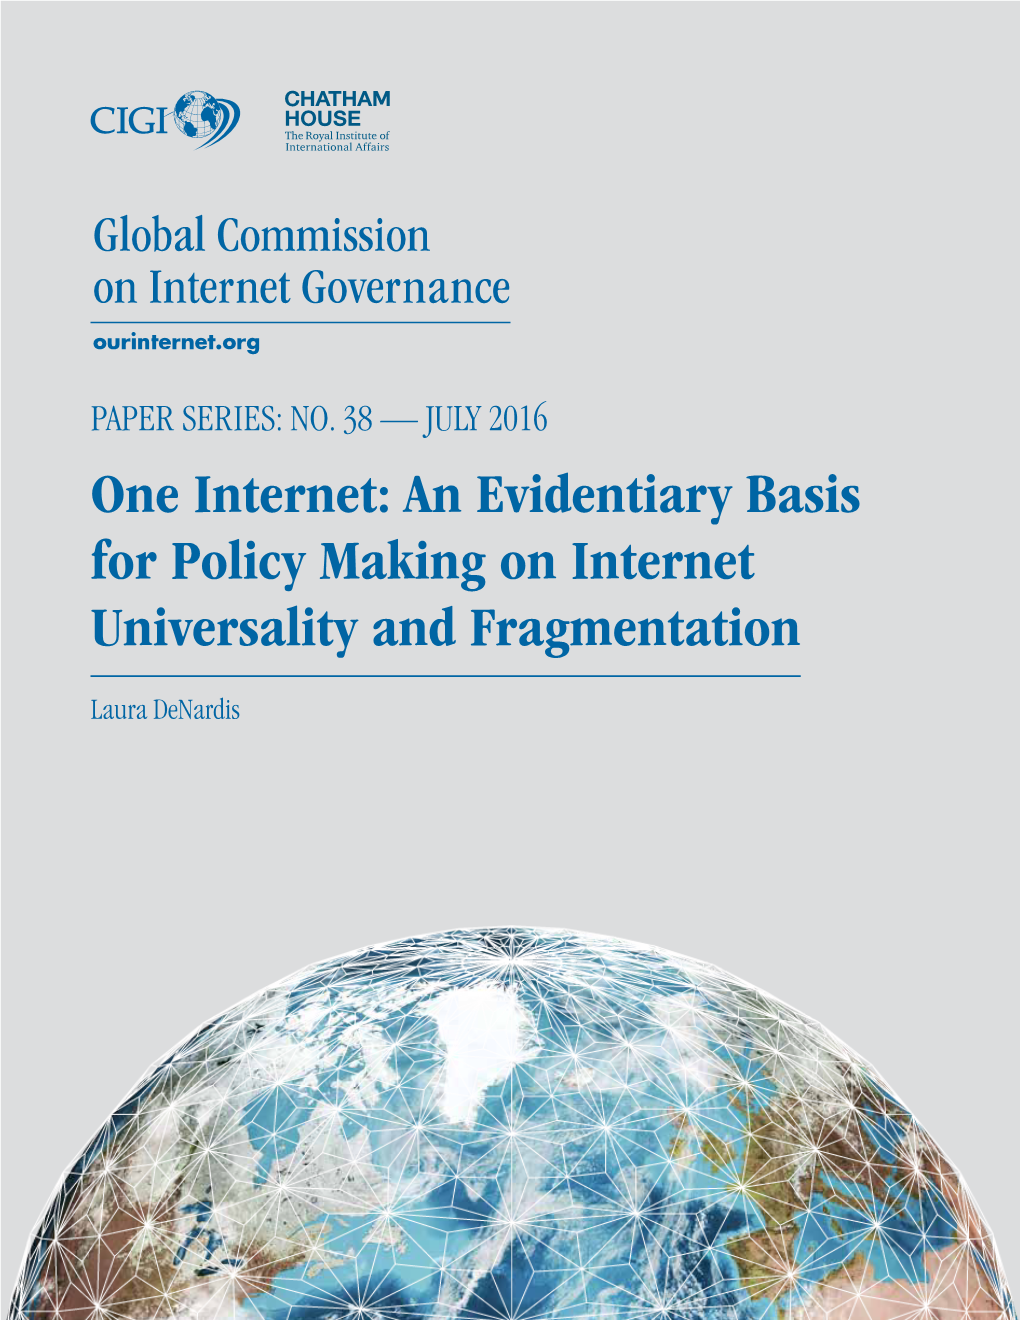 An Evidentiary Basis for Policy Making on Internet Universality and Fragmentation